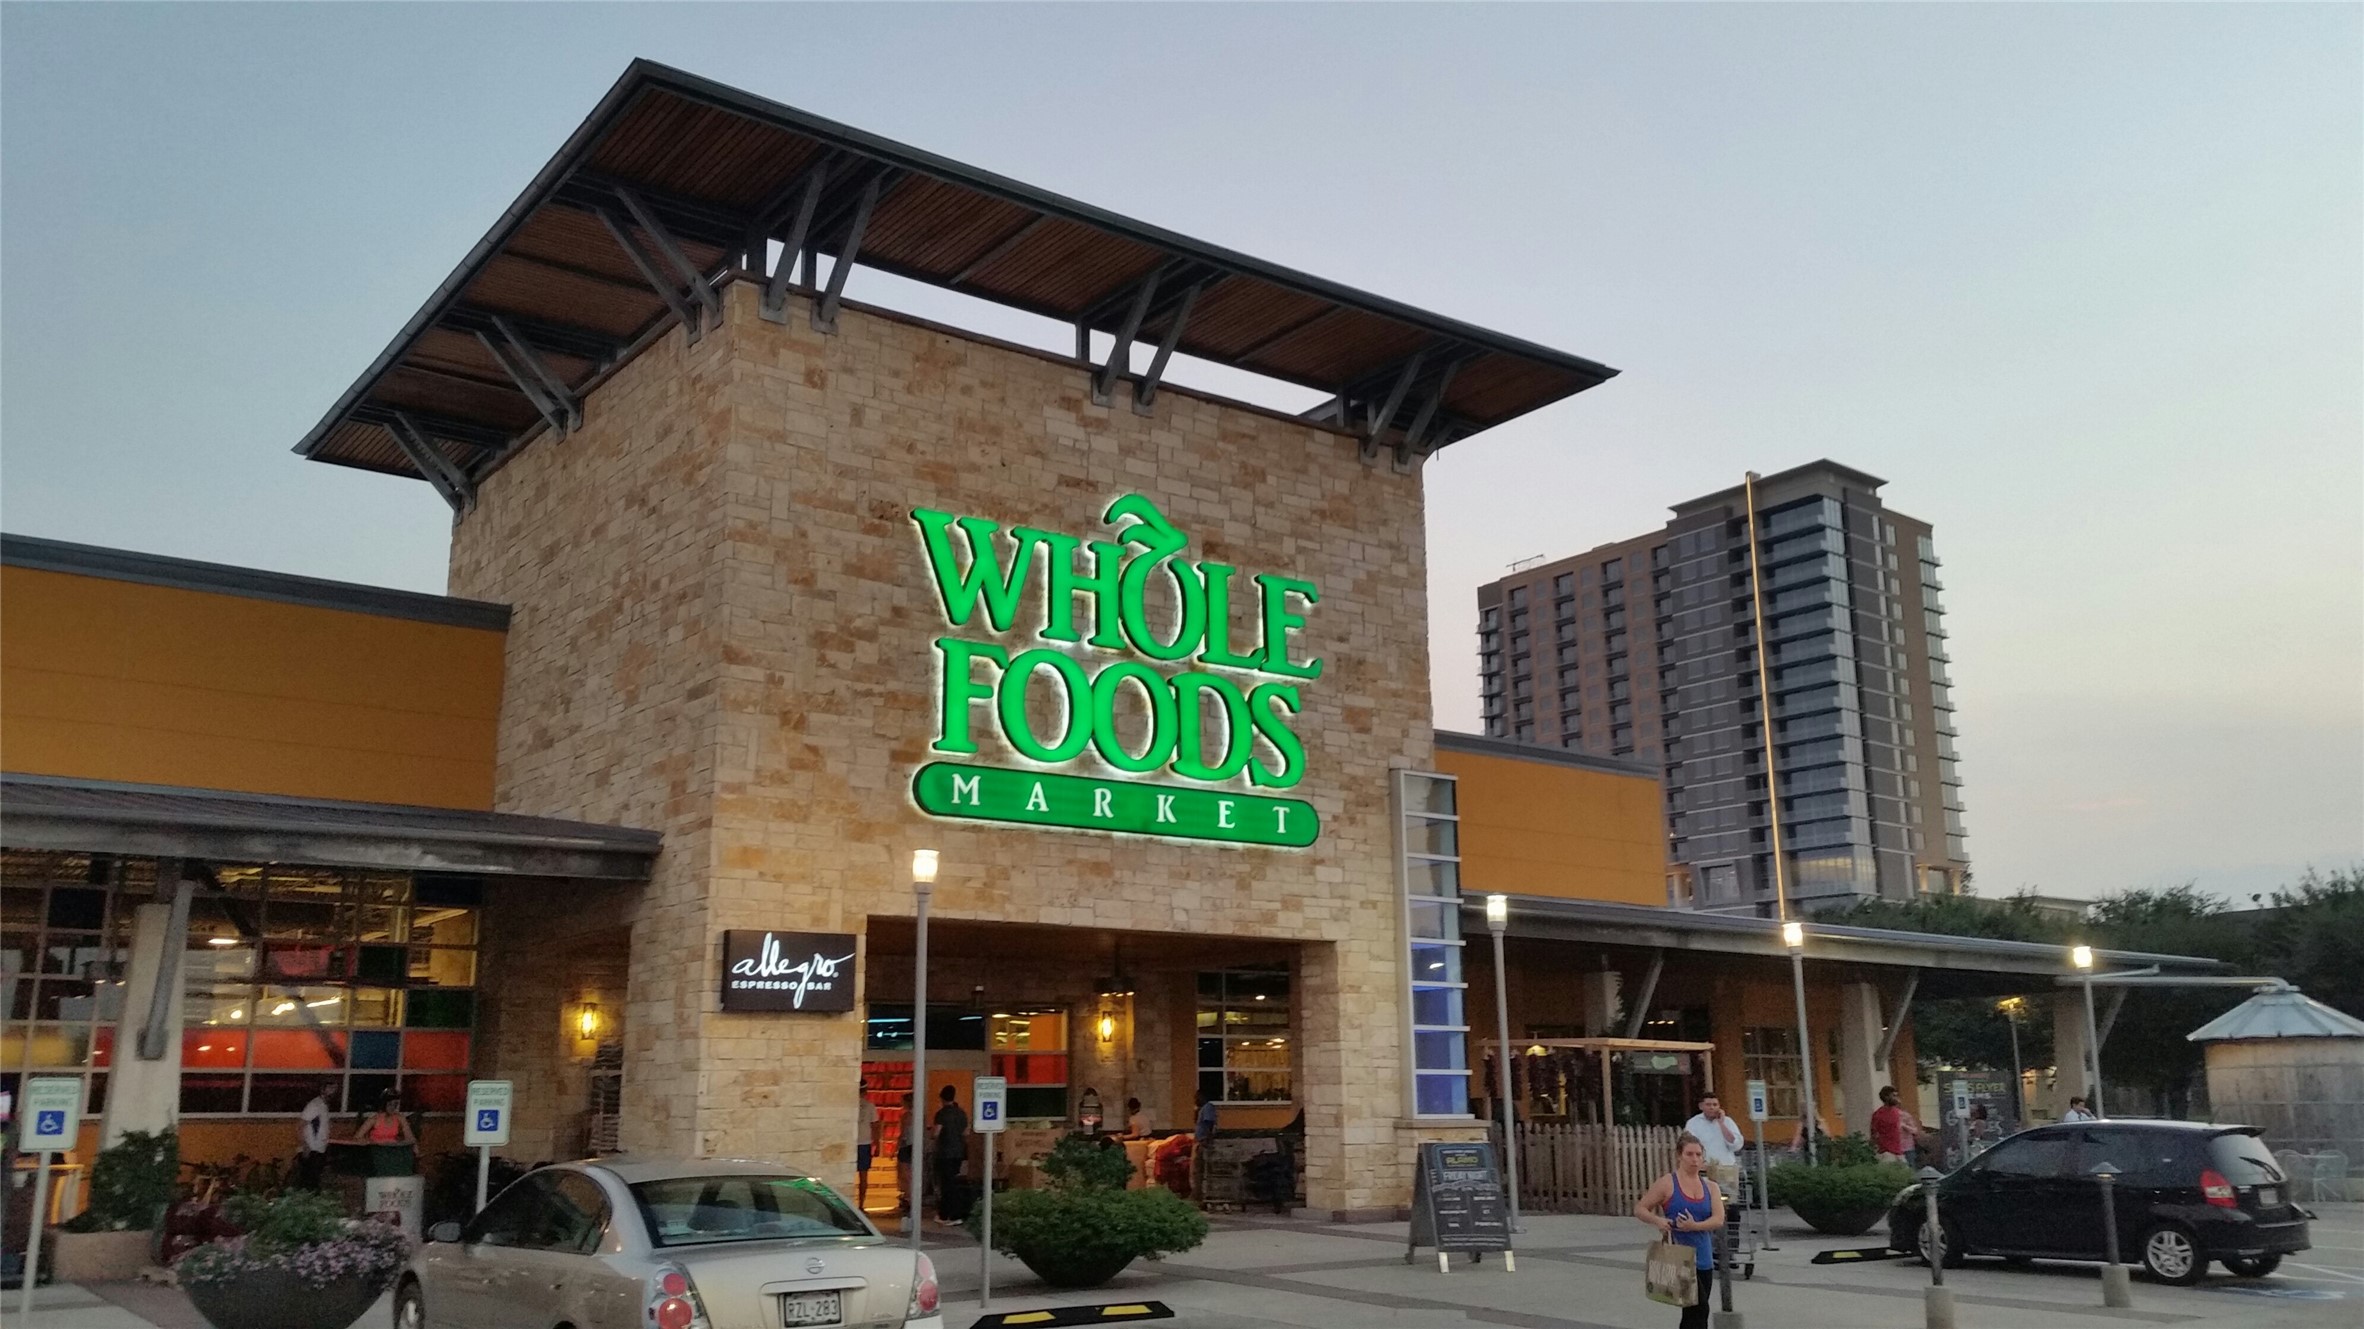 WHOLE FOODS Montrose on Waugh Dr and W. Dallas